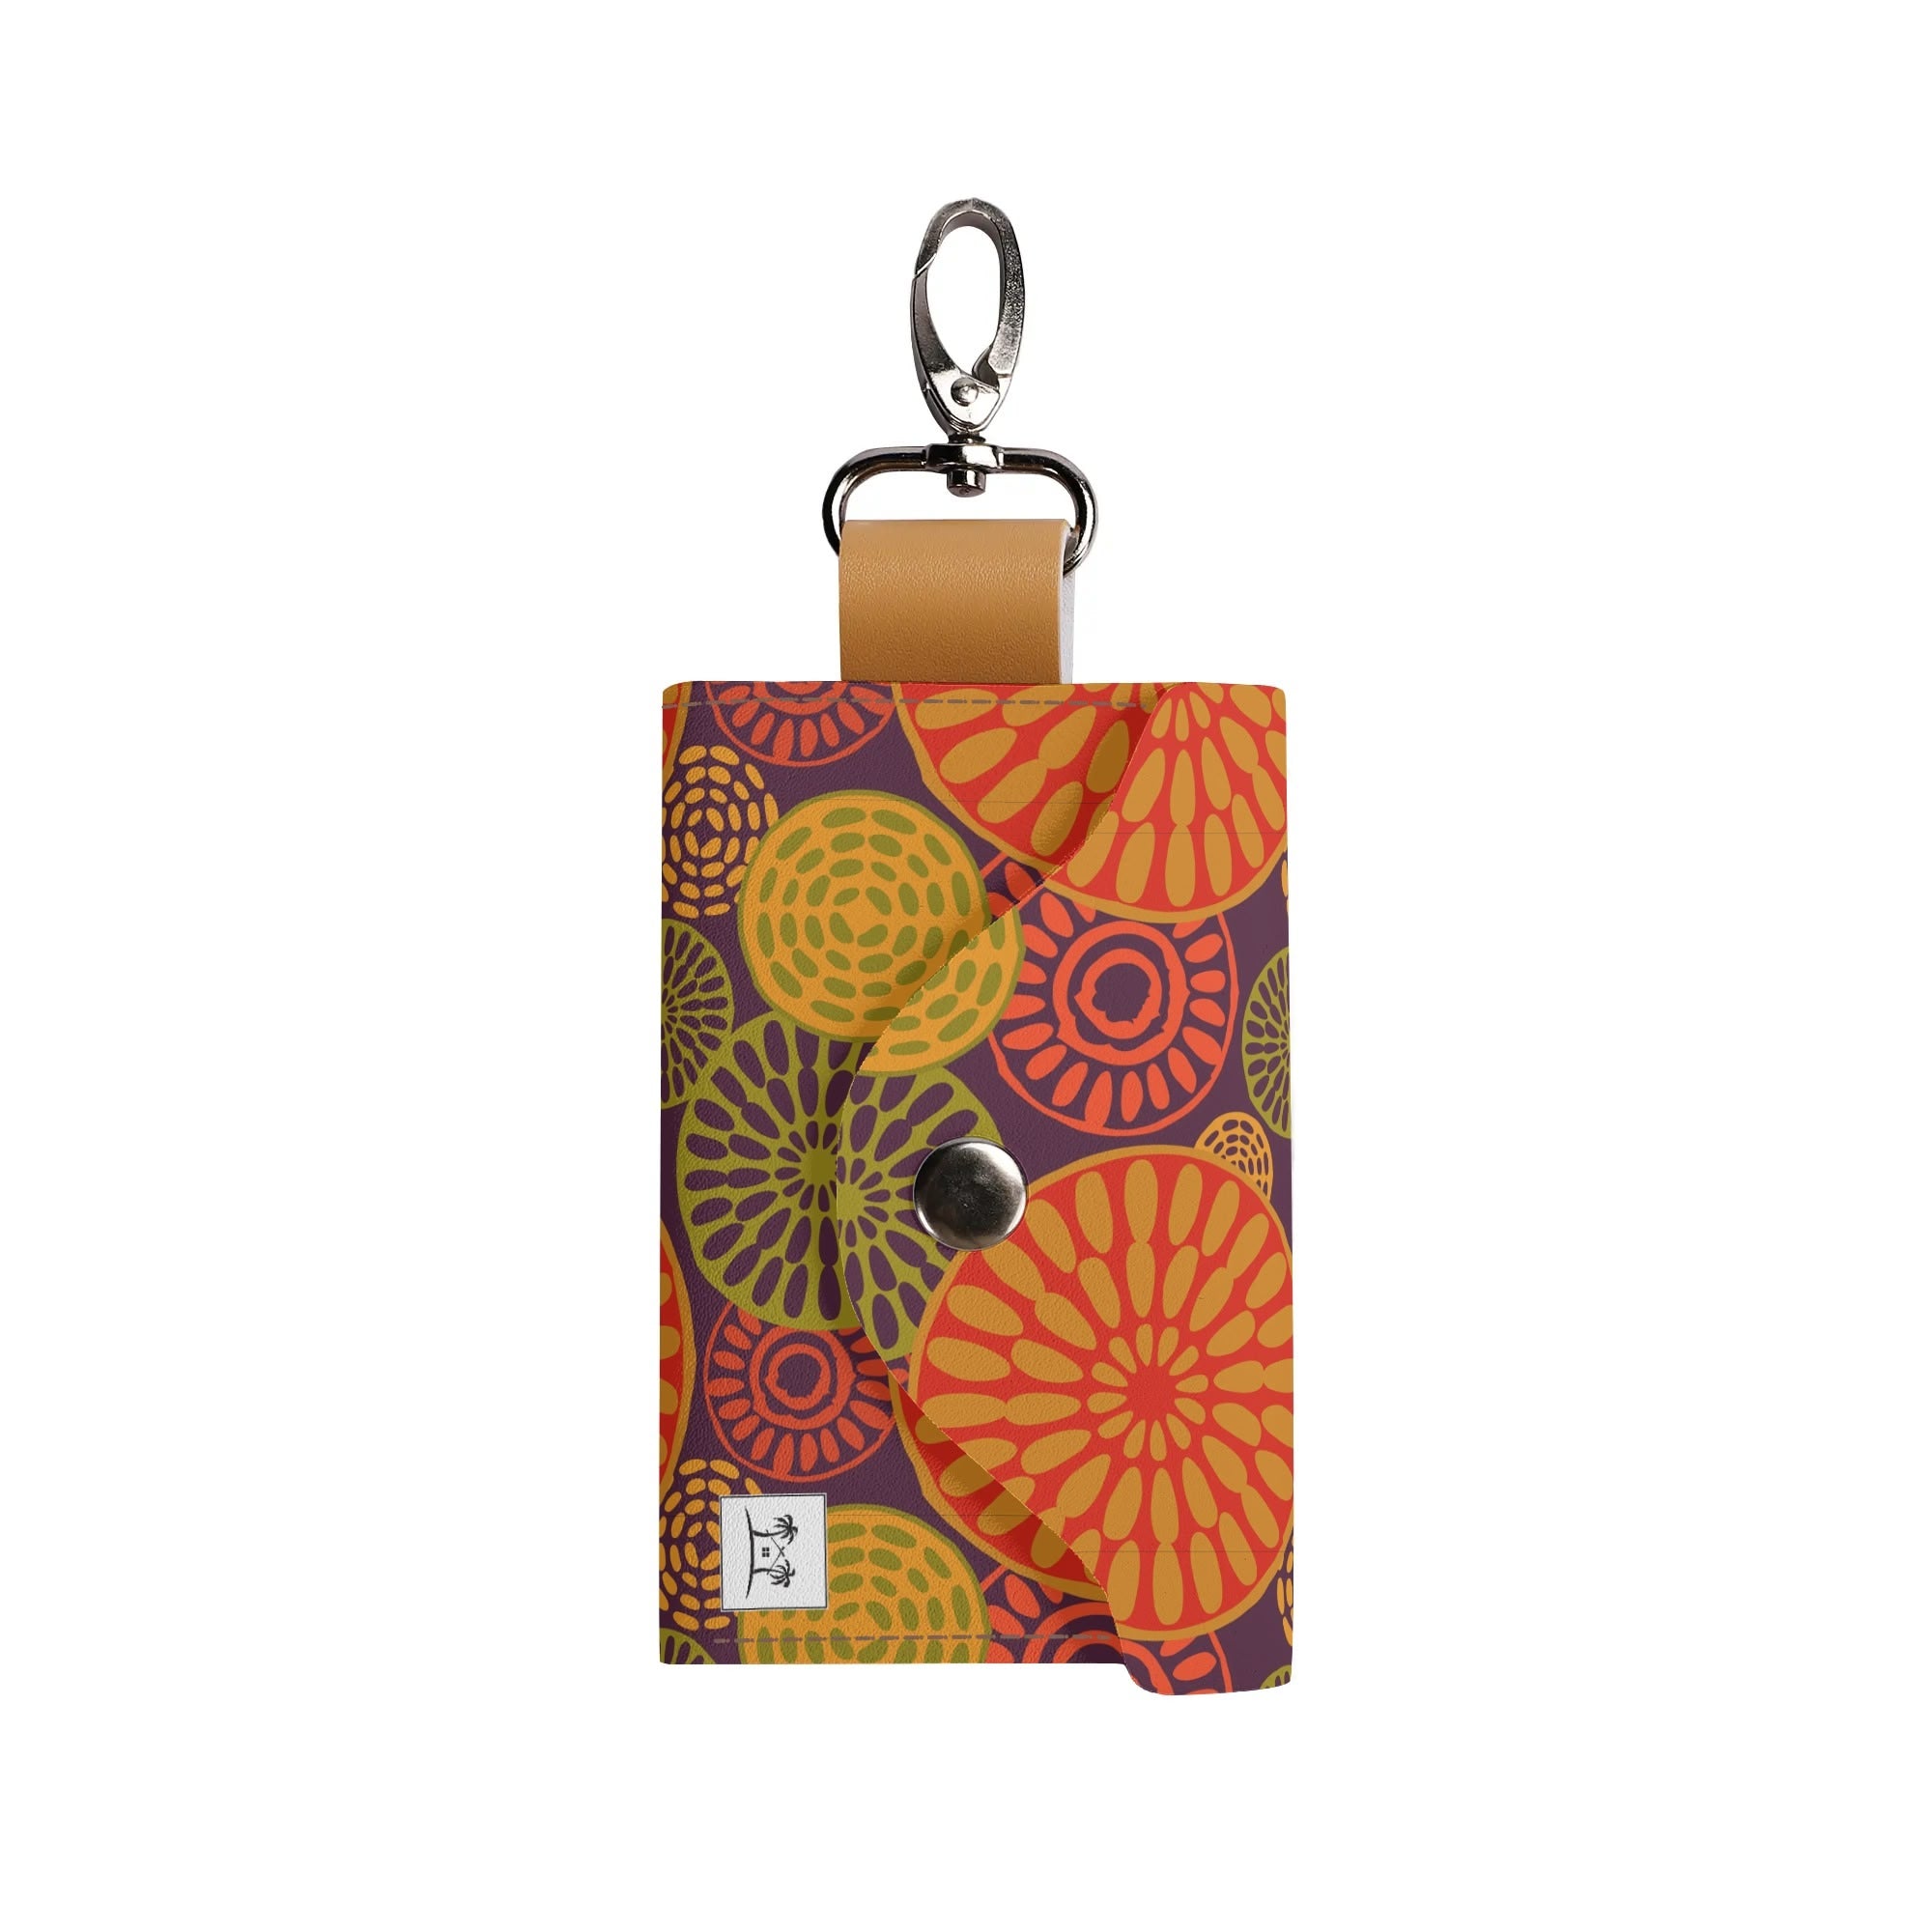 Women's Faux Leather Keychain Purse - Tribal Circles